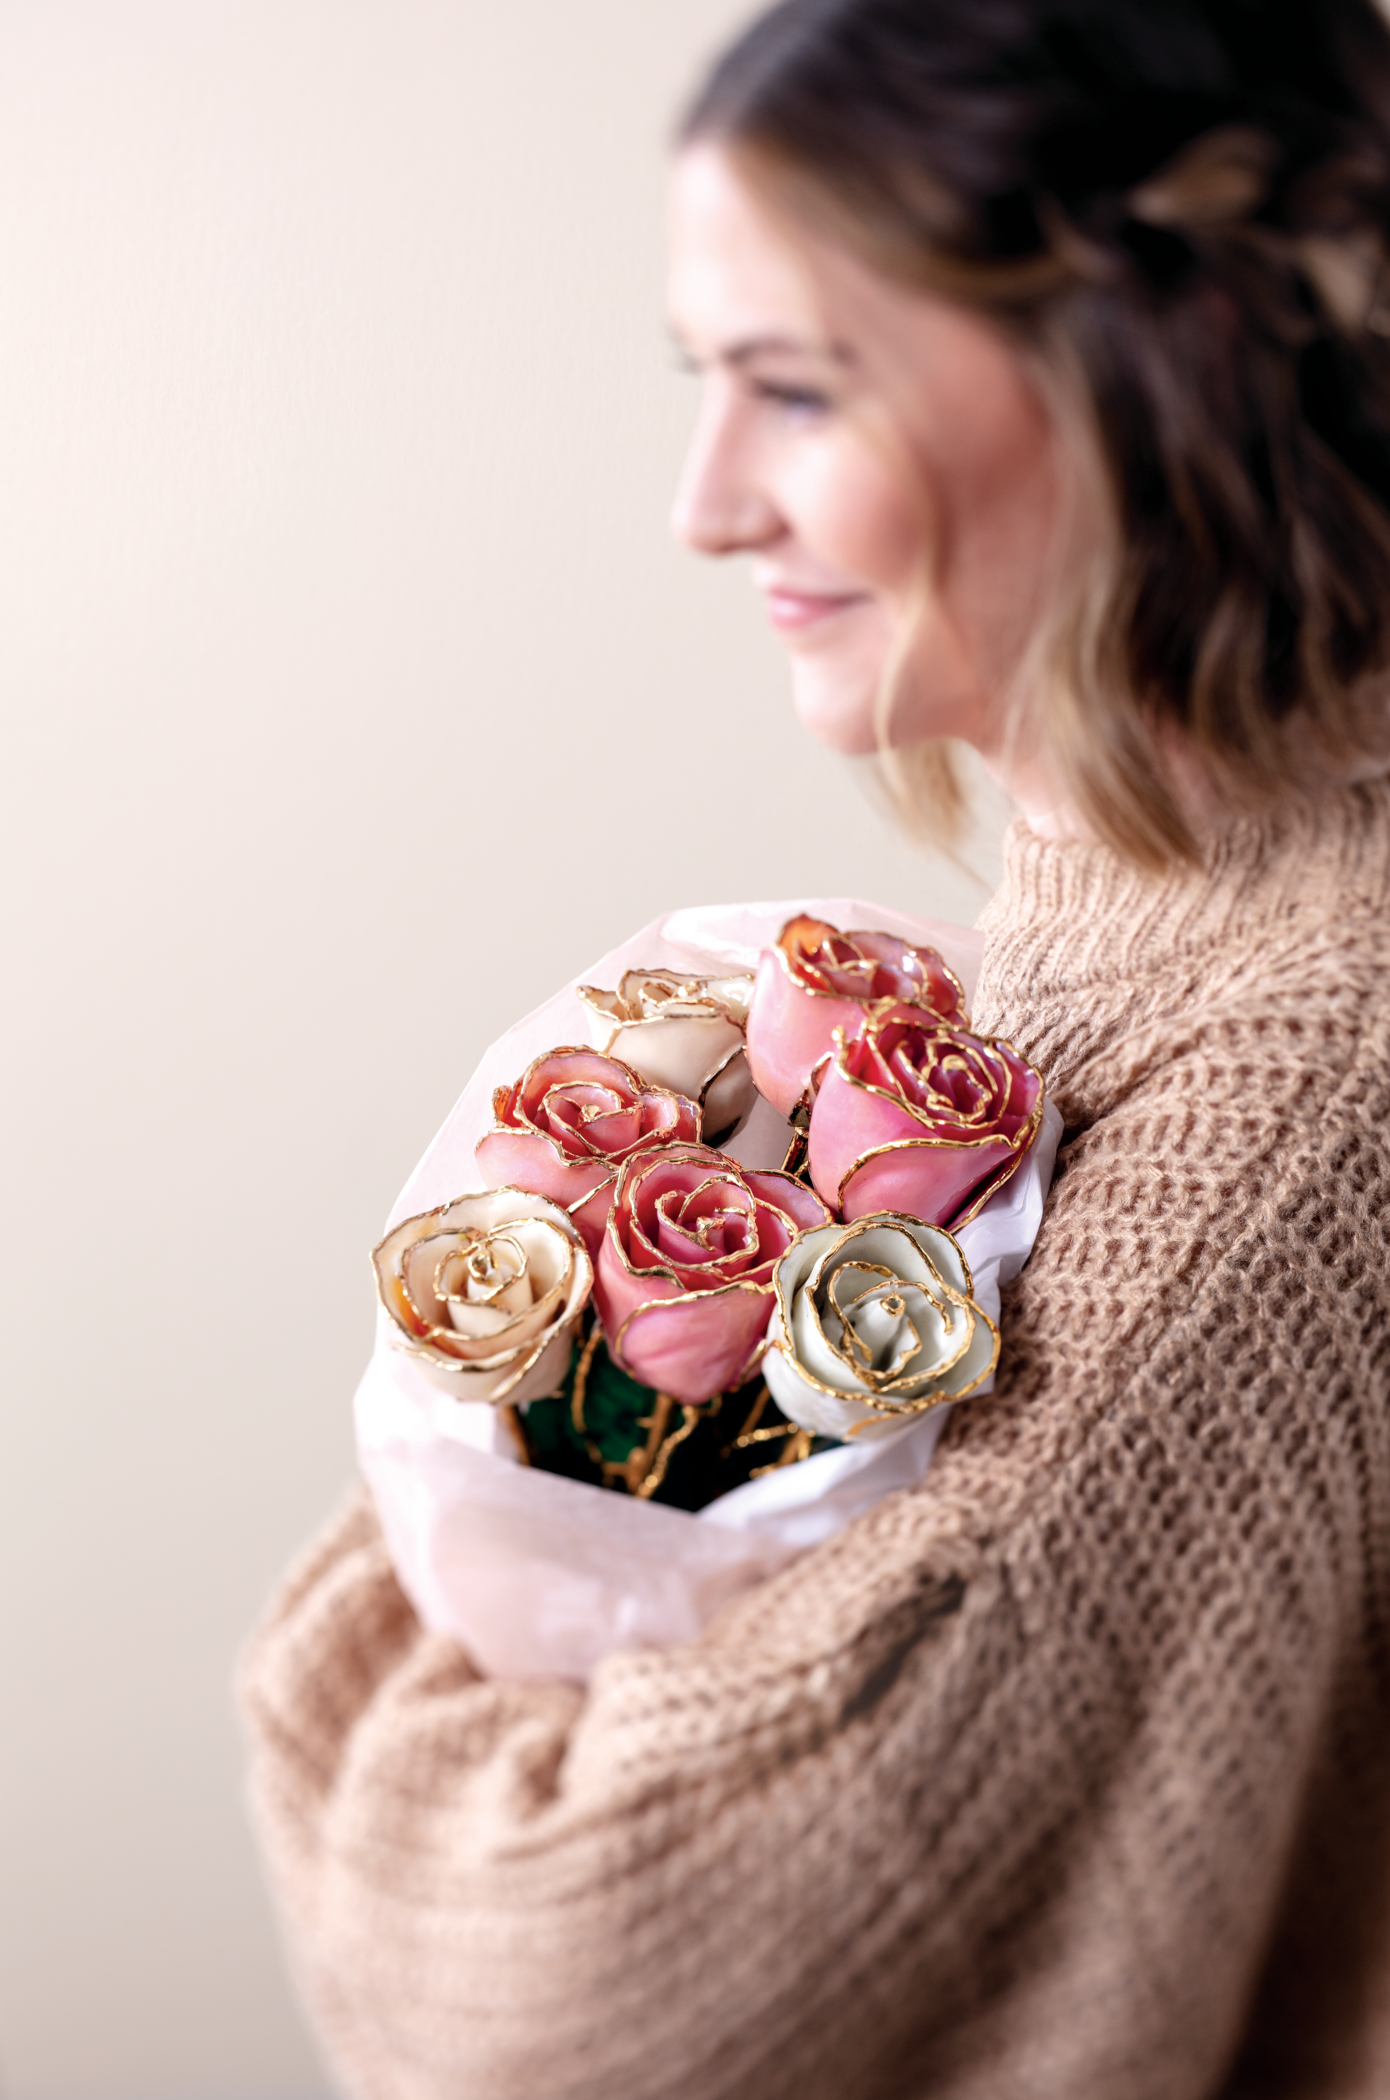 A smiling woman holding a bouquet of pink and white Everlasting Roses, hand painted with 24k gold trim.